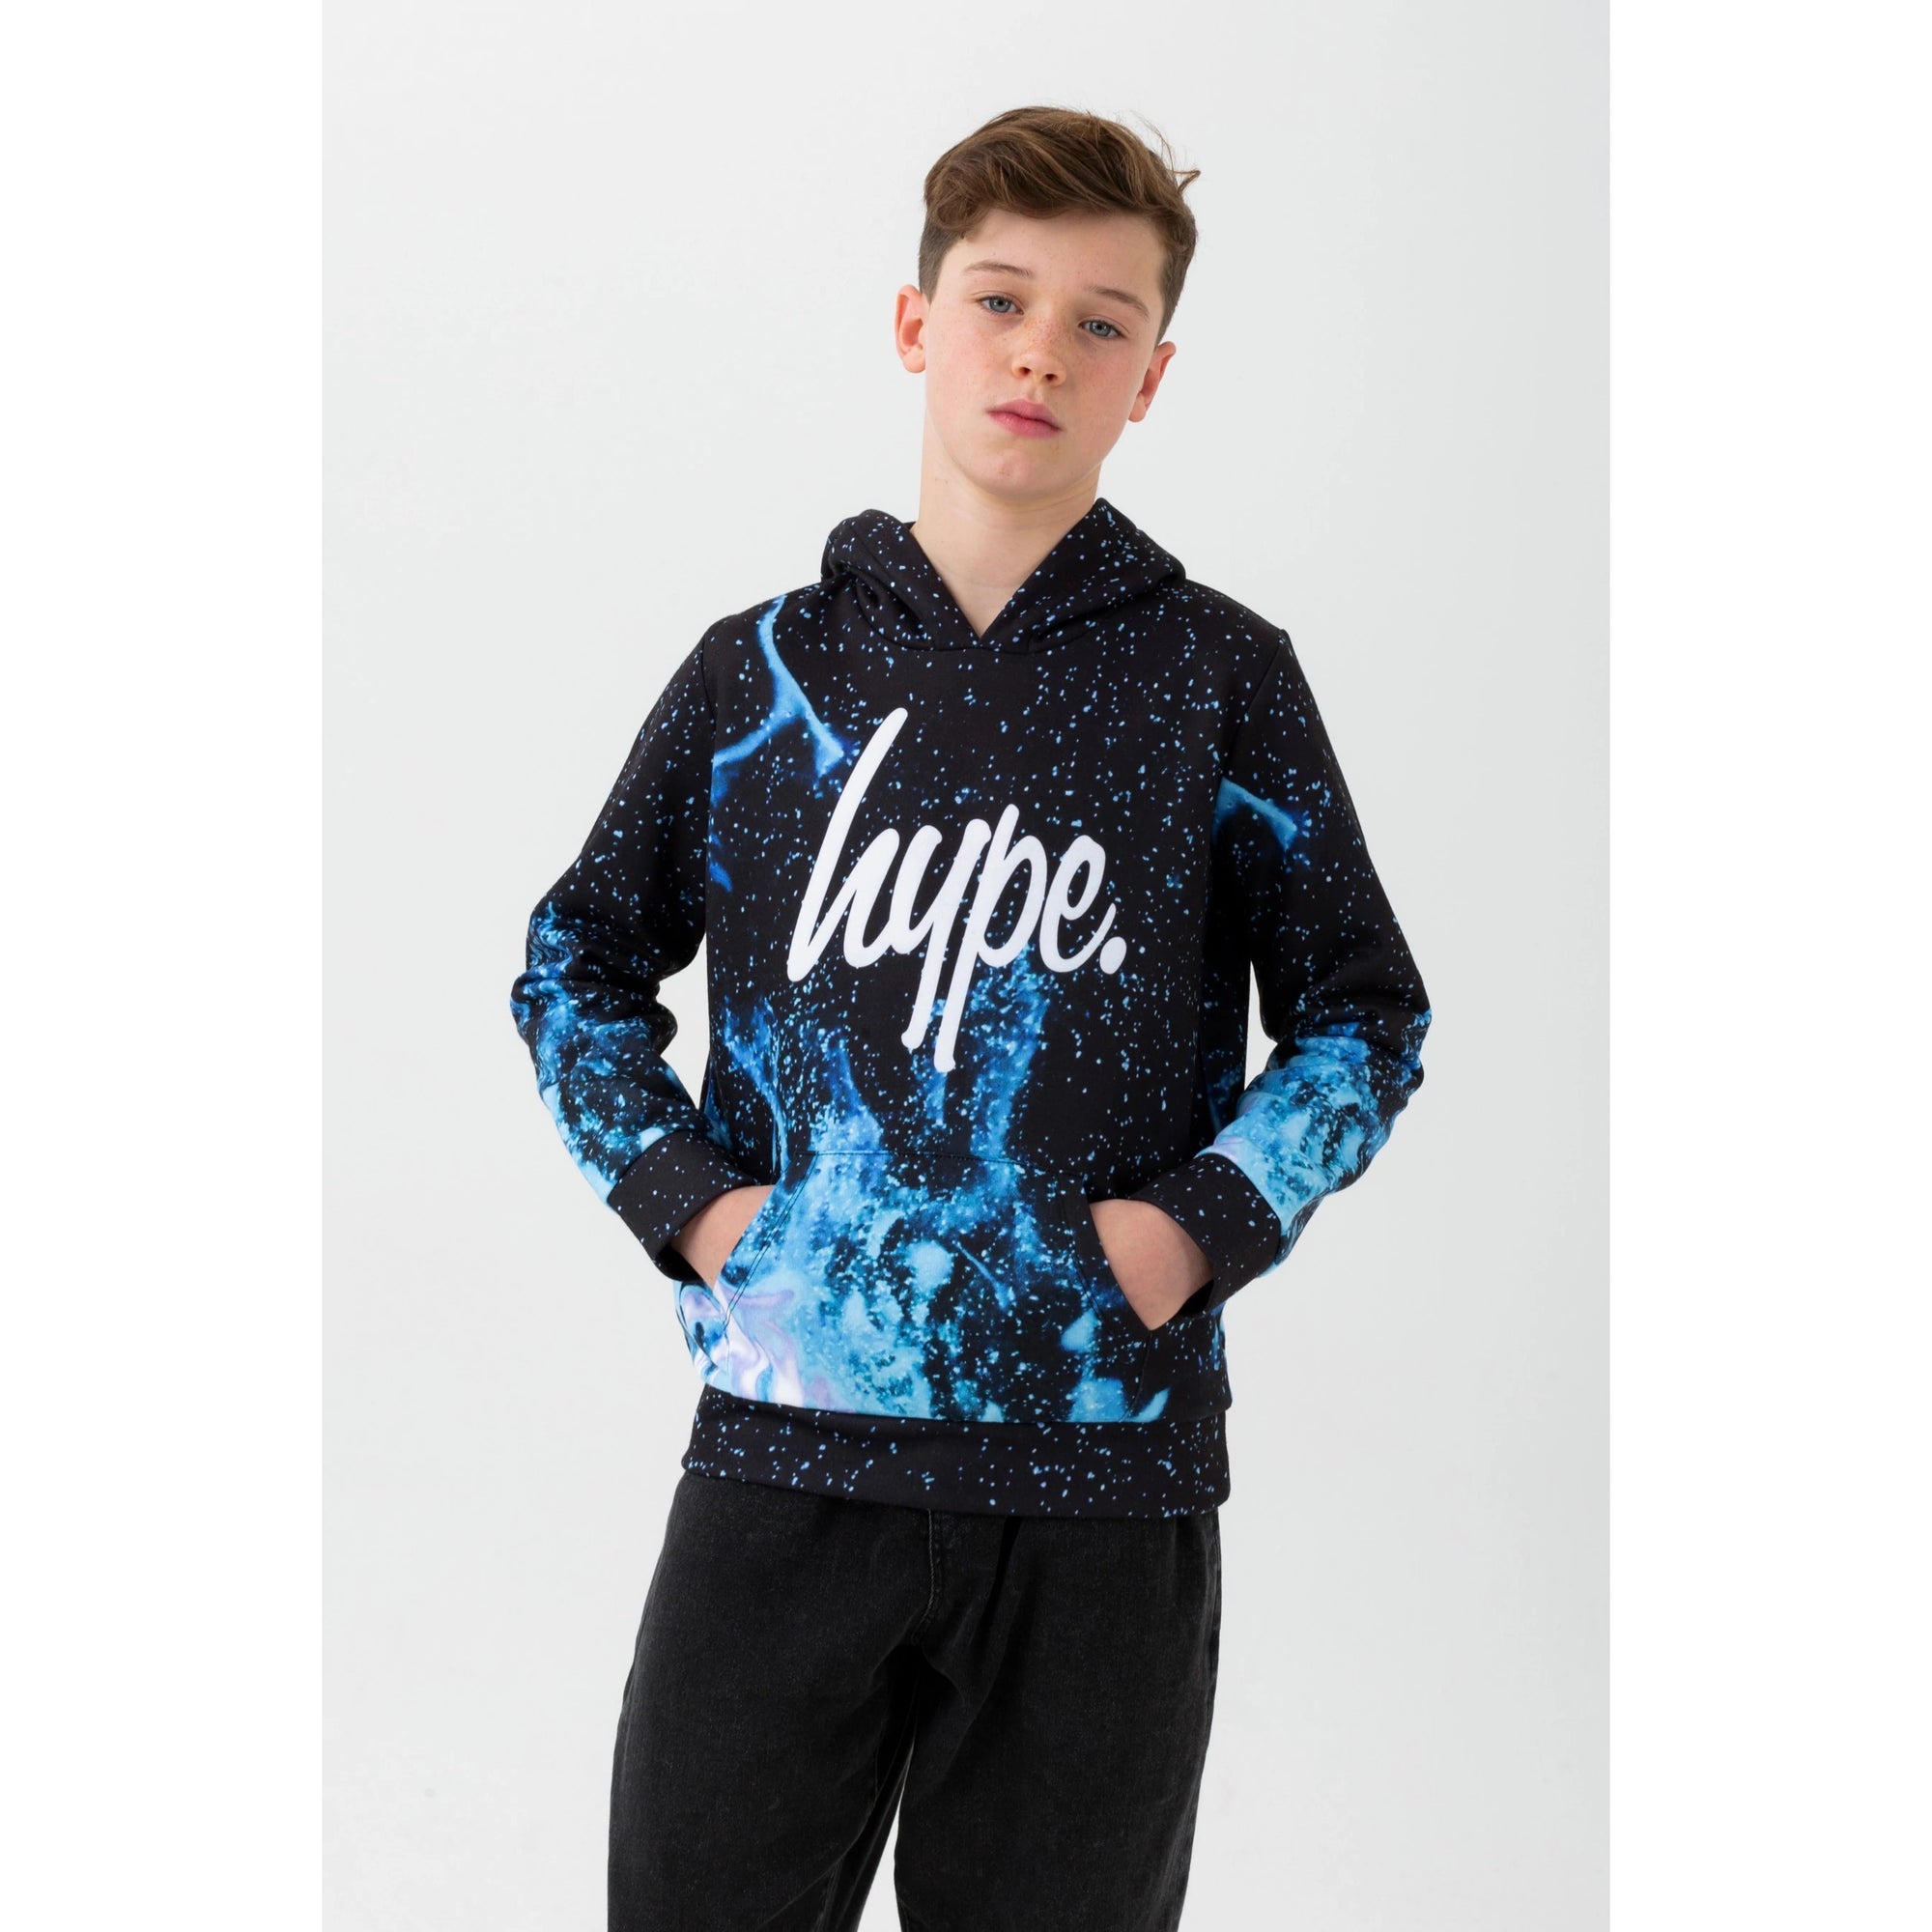 Hype Blue Fire Hoodie Zvlr107 Clothing 7/8YRS / Blue,9/10YRS / Blue,11/12YRS / Blue,13YRS / Blue,14YRS / Blue,15YRS / Blue,16YRS / Blue